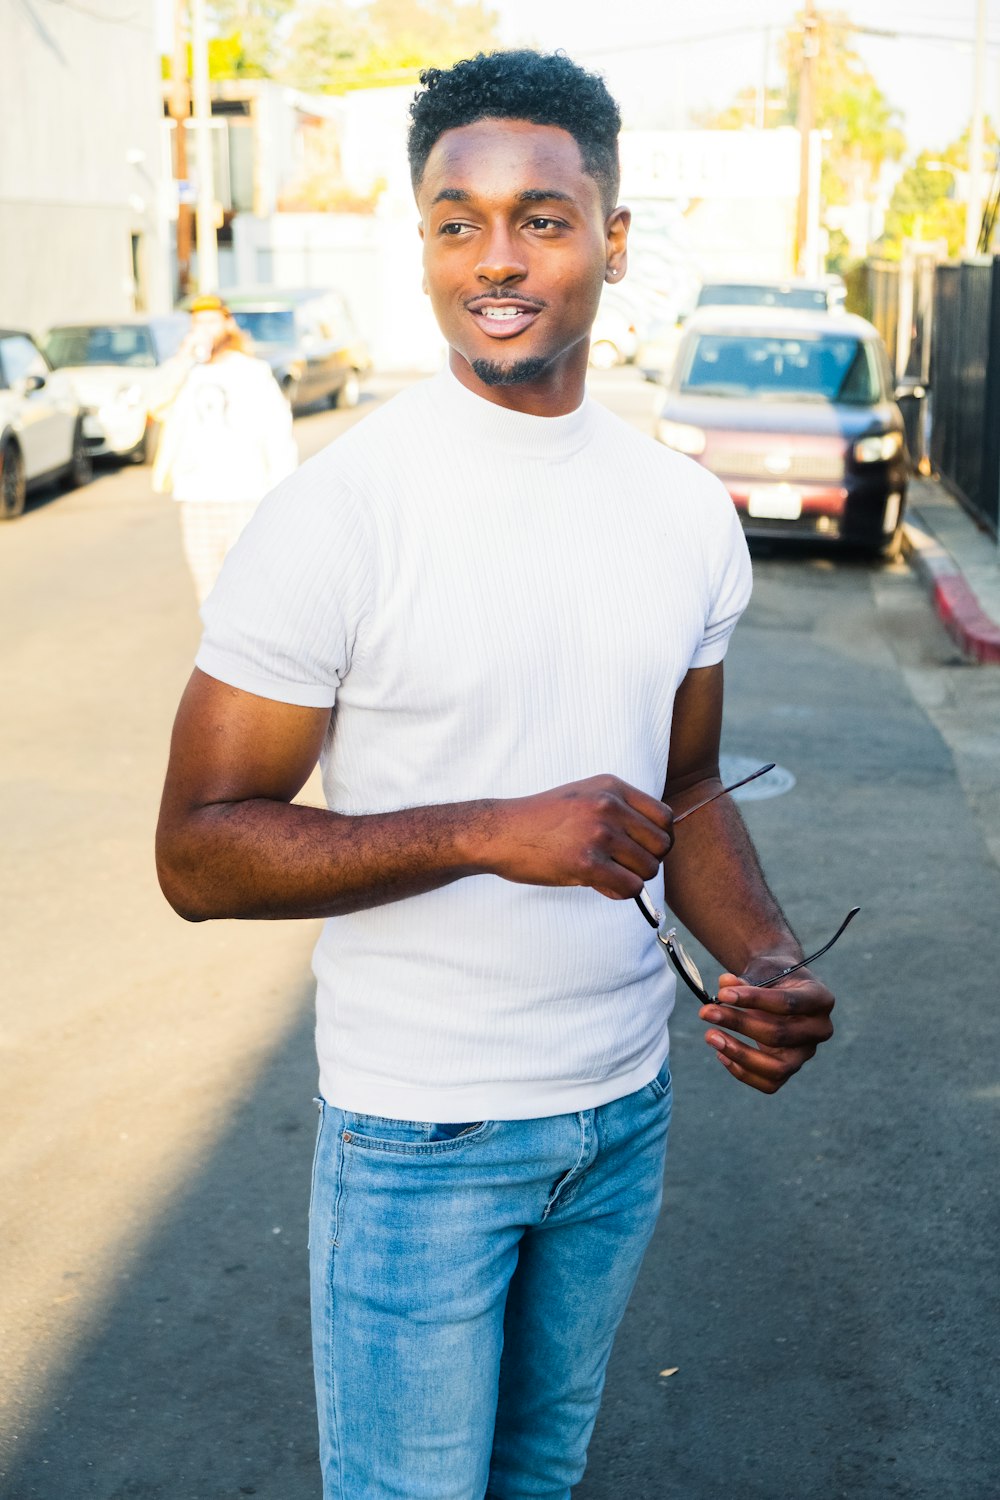 Man in white crew neck t-shirt and blue denim jeans standing on sidewalk  during daytime photo – Free Ca Image on Unsplash